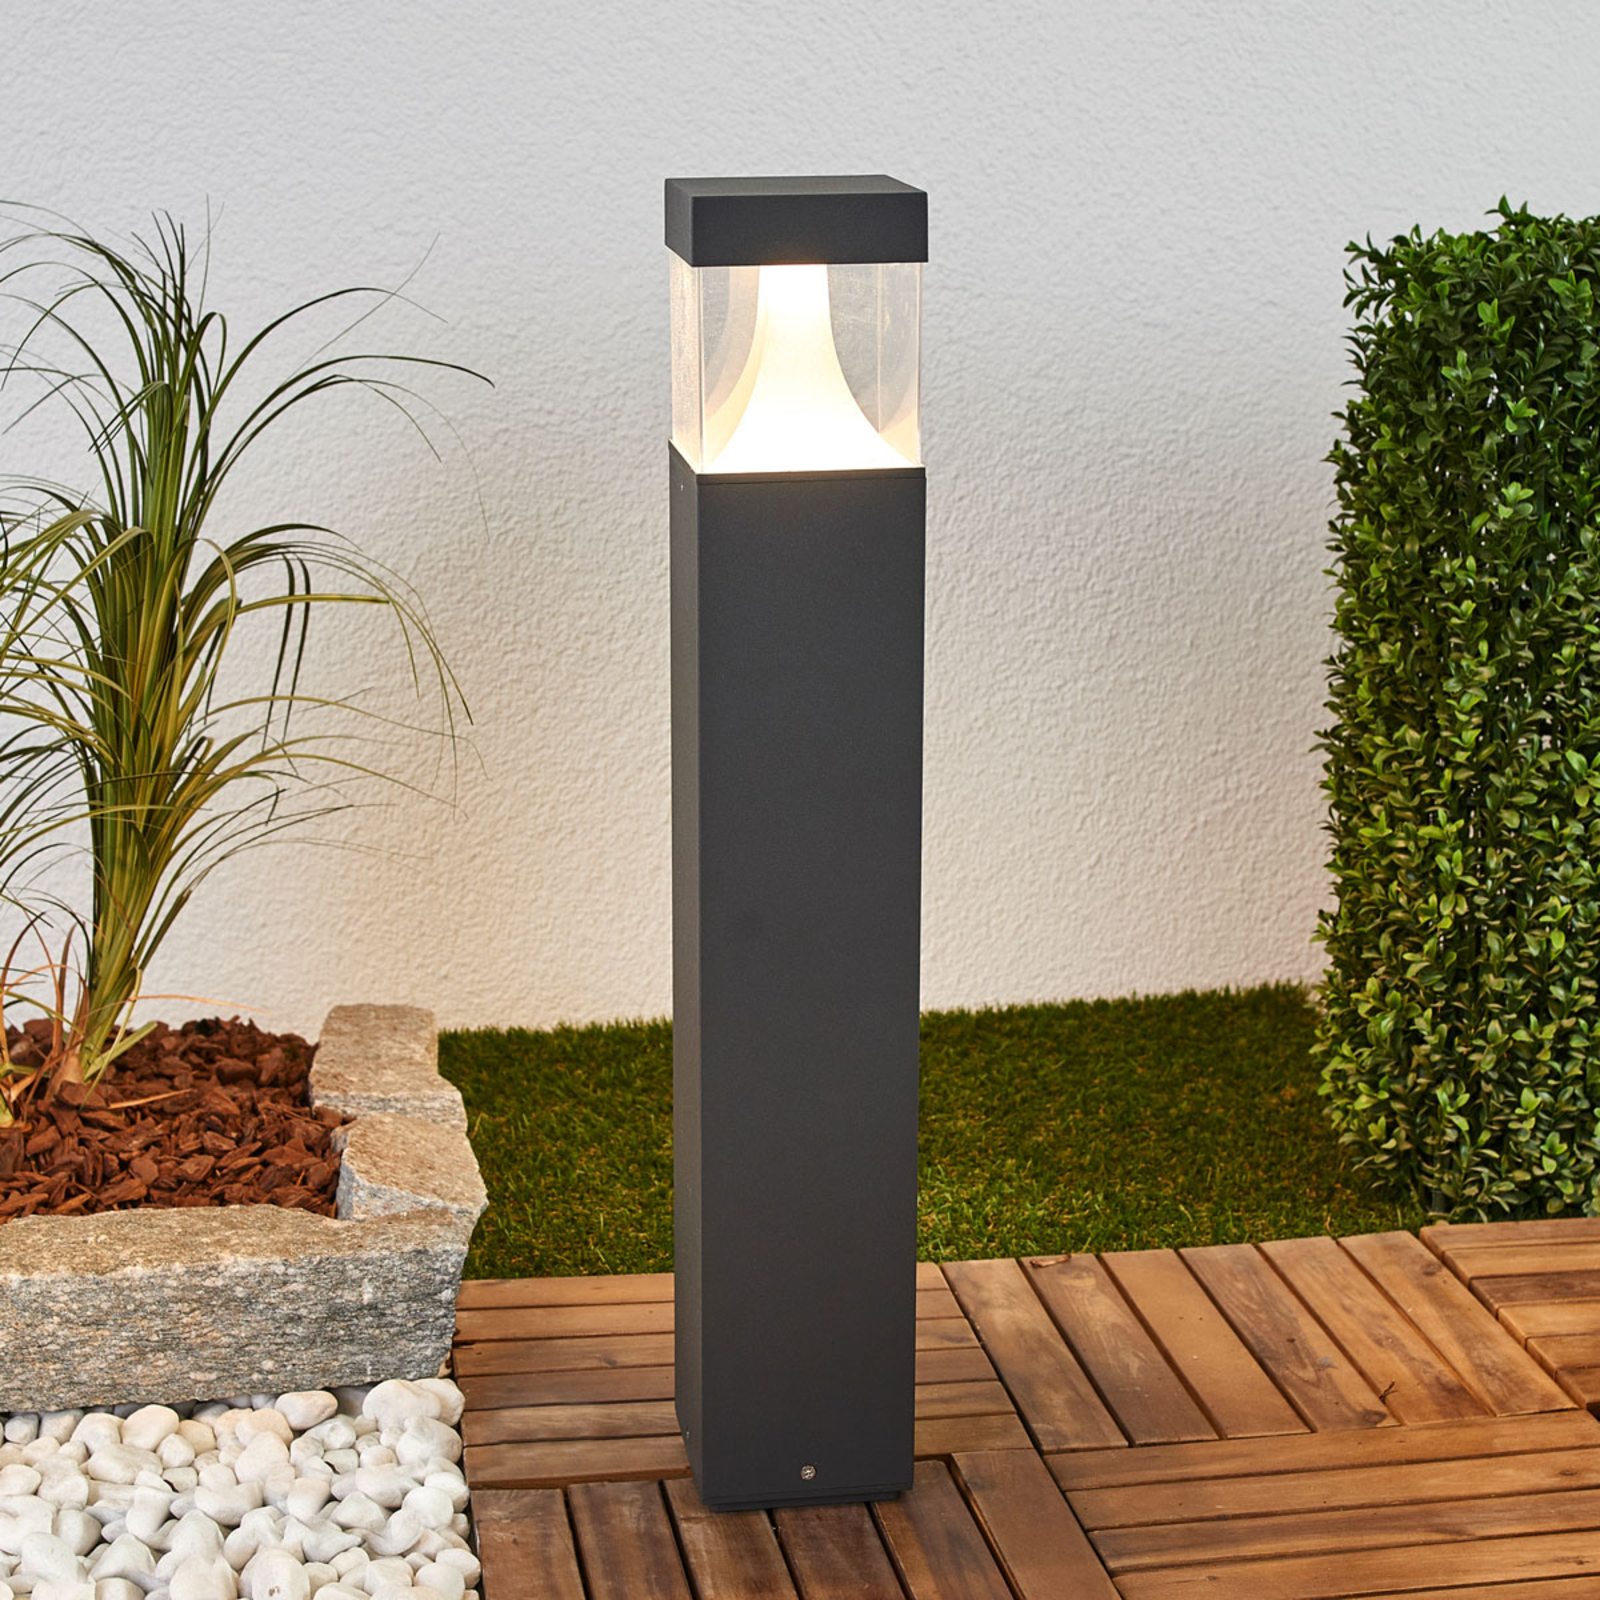 Egon outdoor path lamp, with LED